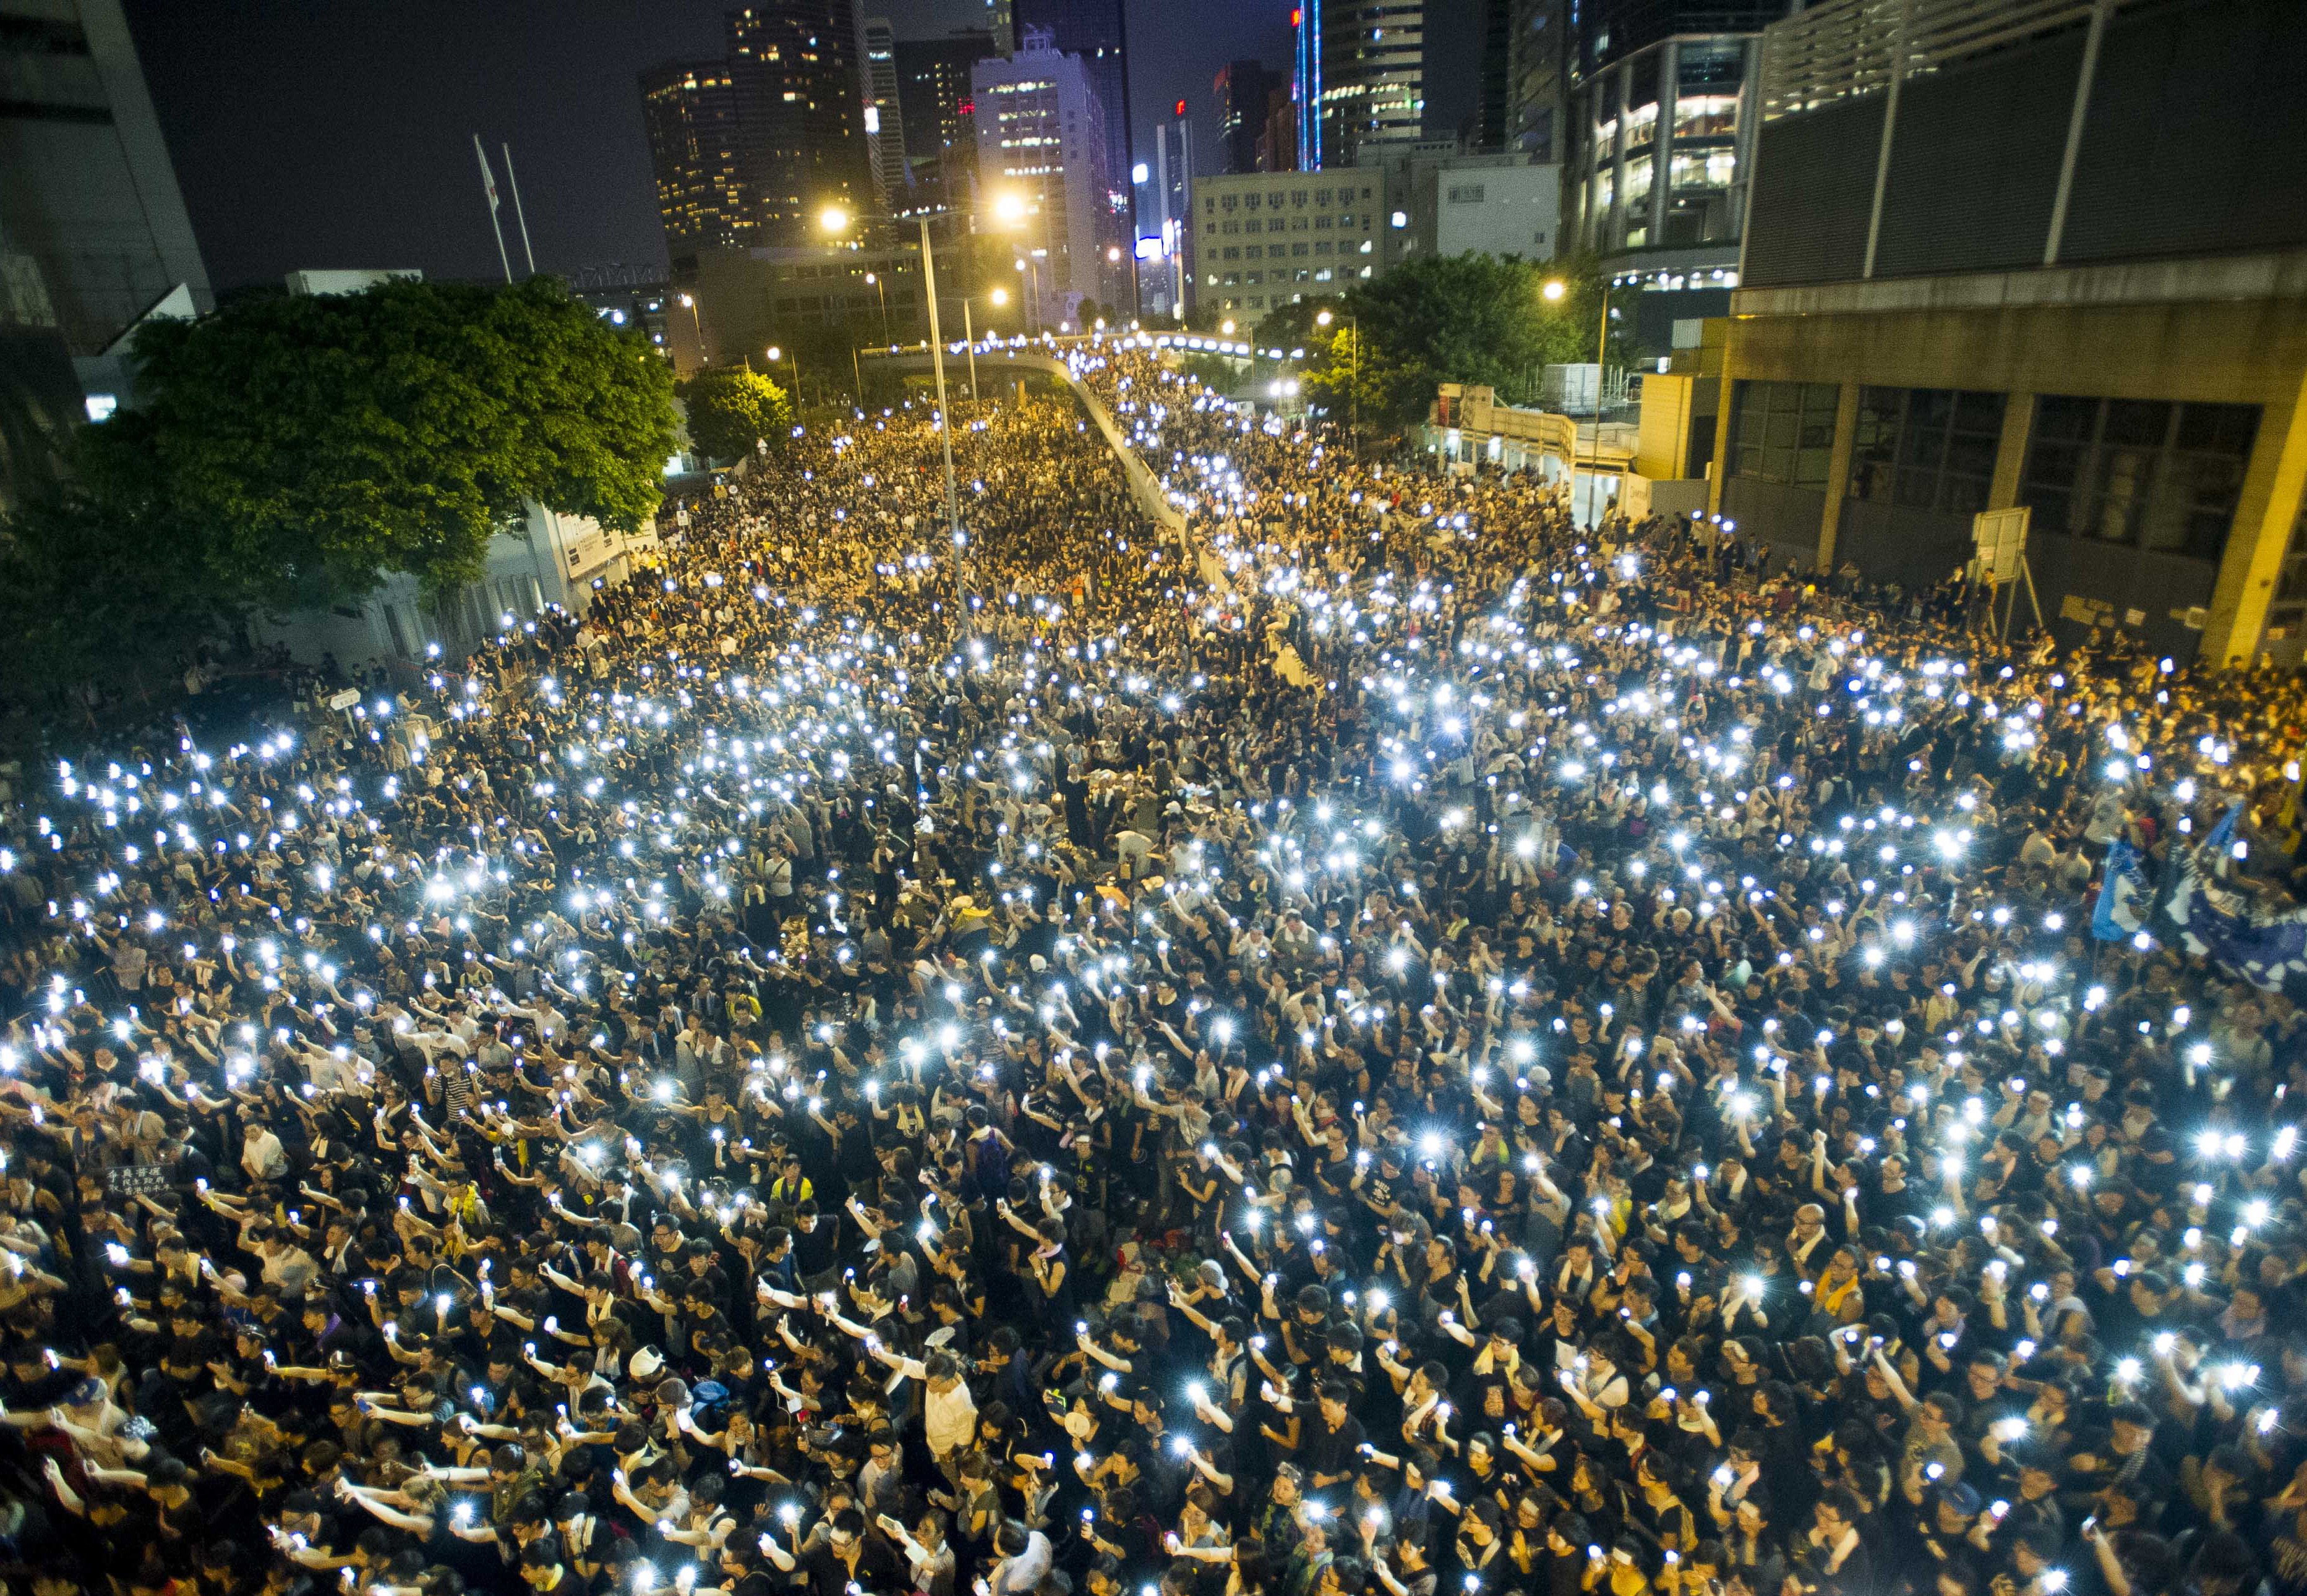 Protestors hold up their cellphones in a display of solidarity during a protest outside the headquarters of Legislative Council in Hong Kong on Sept. 29, 2014. (Xaume Olleros—AFP/Getty Images)